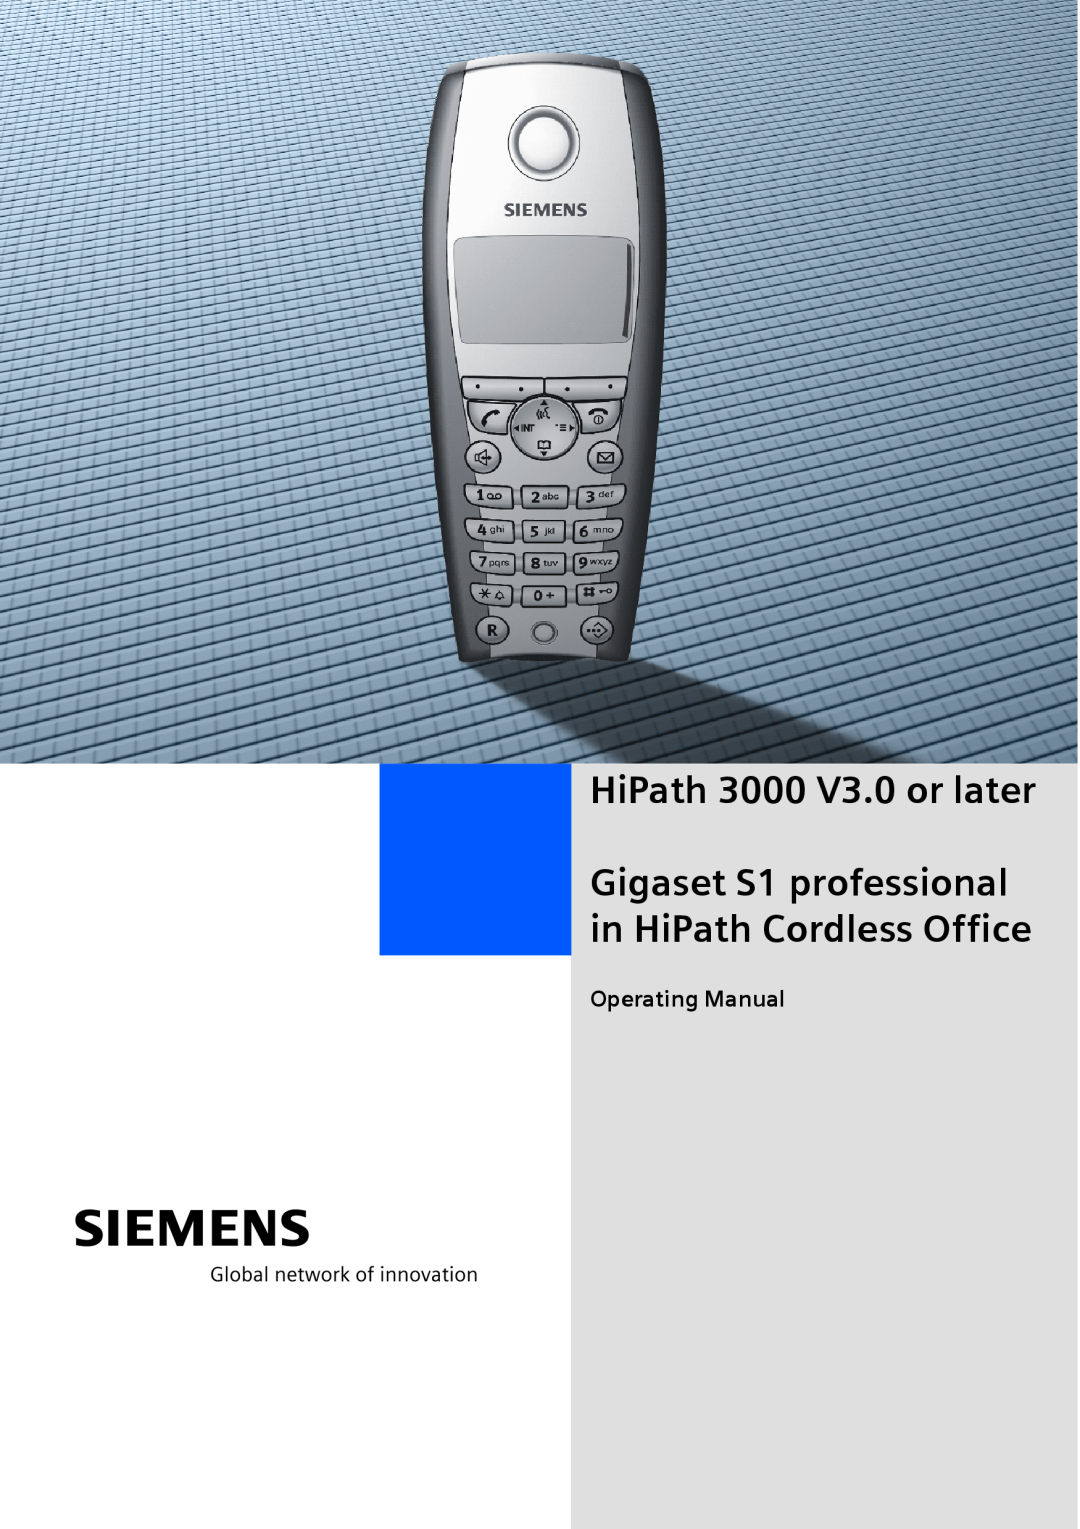 Siemens manual Gigaset S1 professional in HiPath Cordless Office, HiPath 3000 V3.0 or later, Operating Manual 